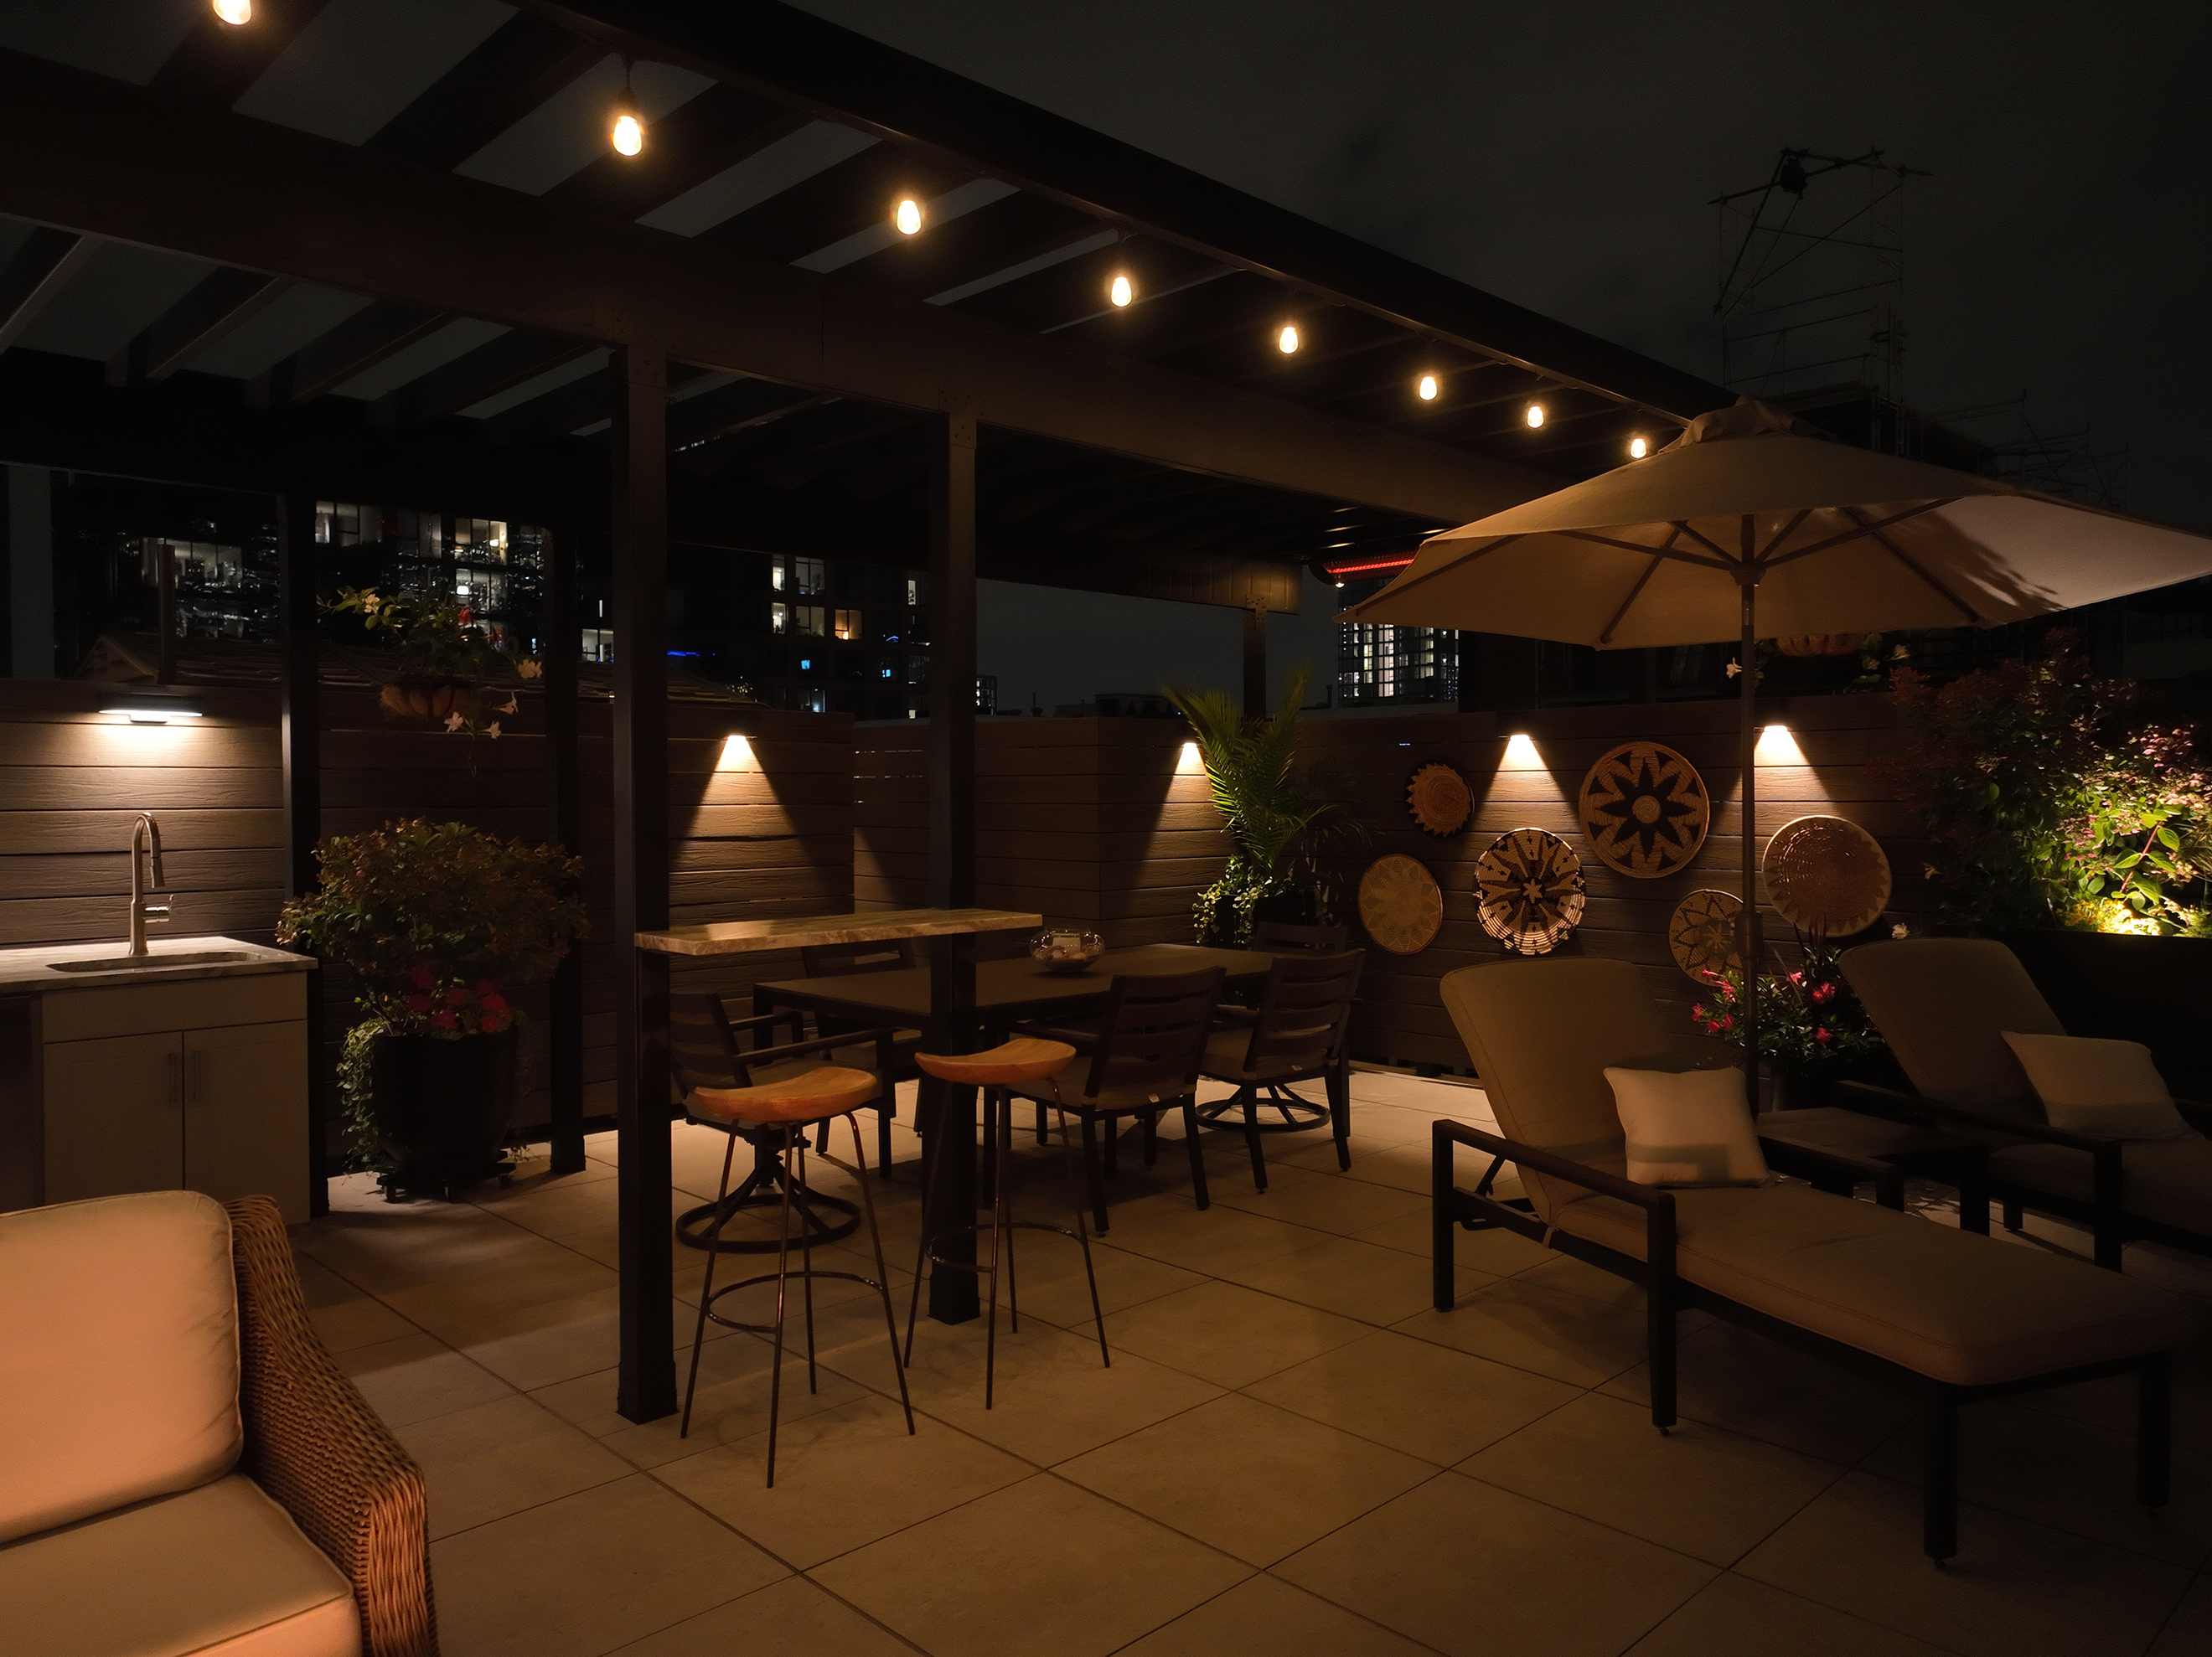 Steel pergola with string lights over outdoor living space with lounge chairs and tables.